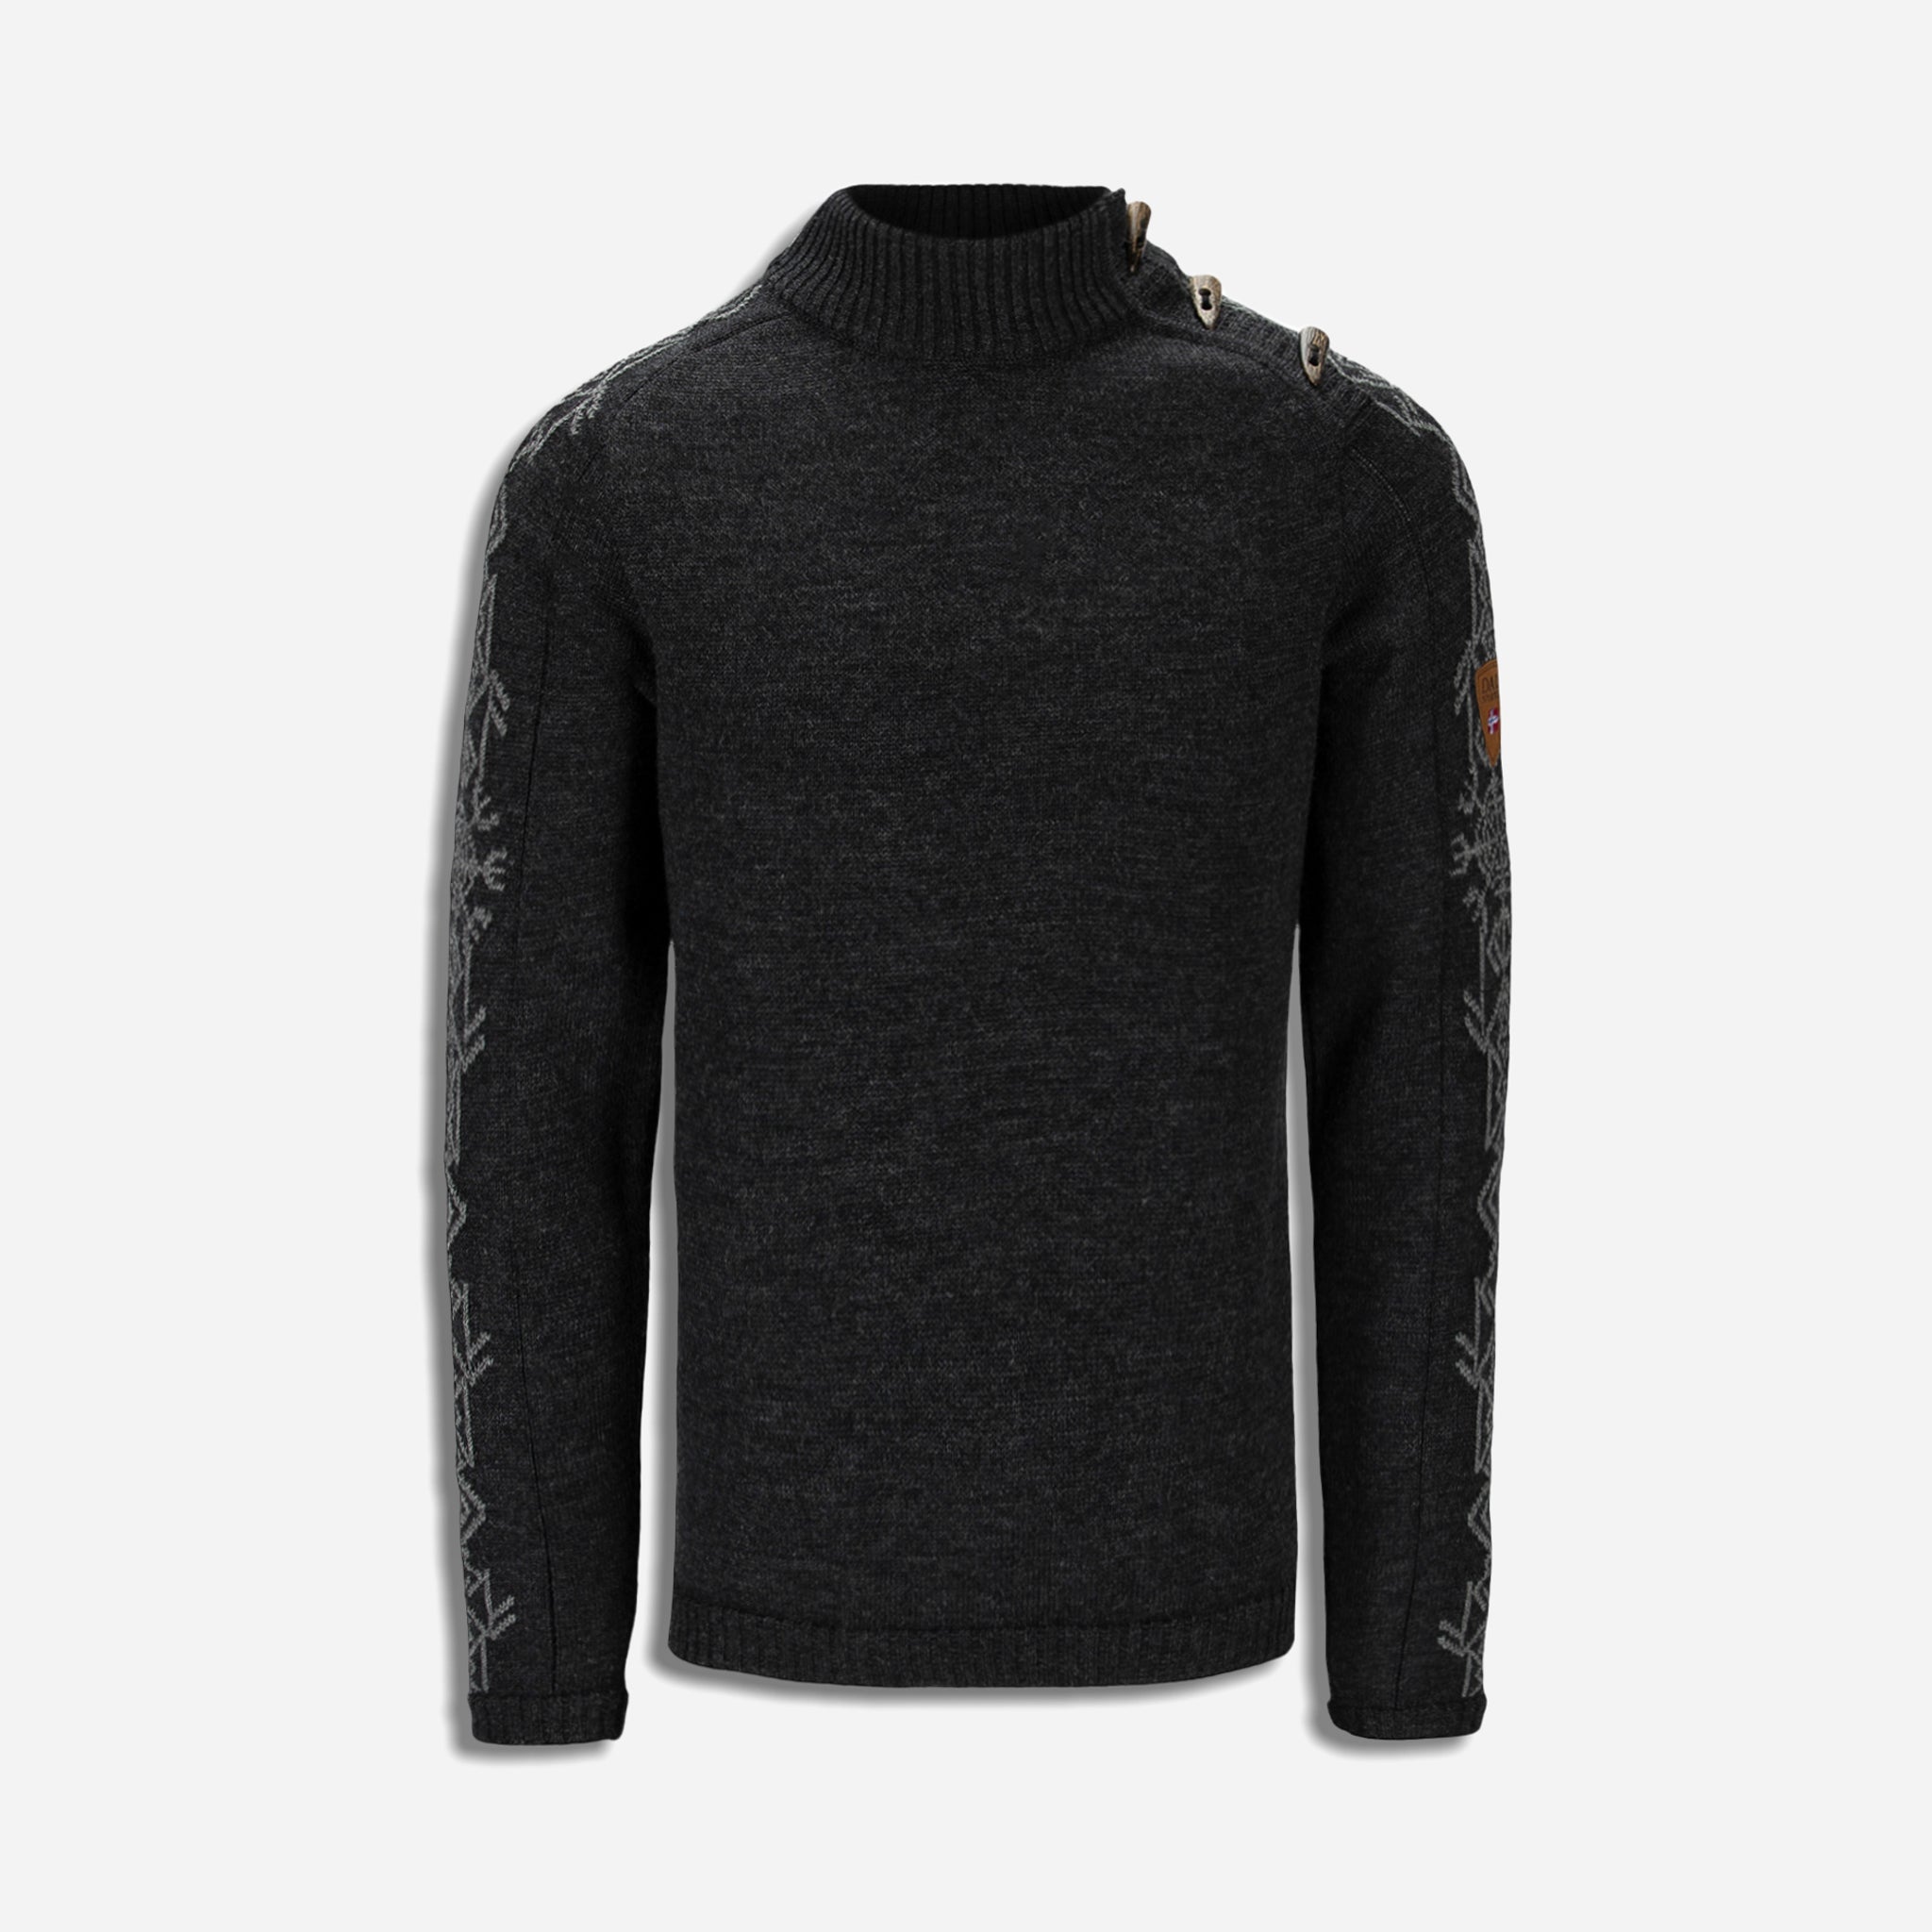 Sigurd Men’s Sweater by Dale of Norway